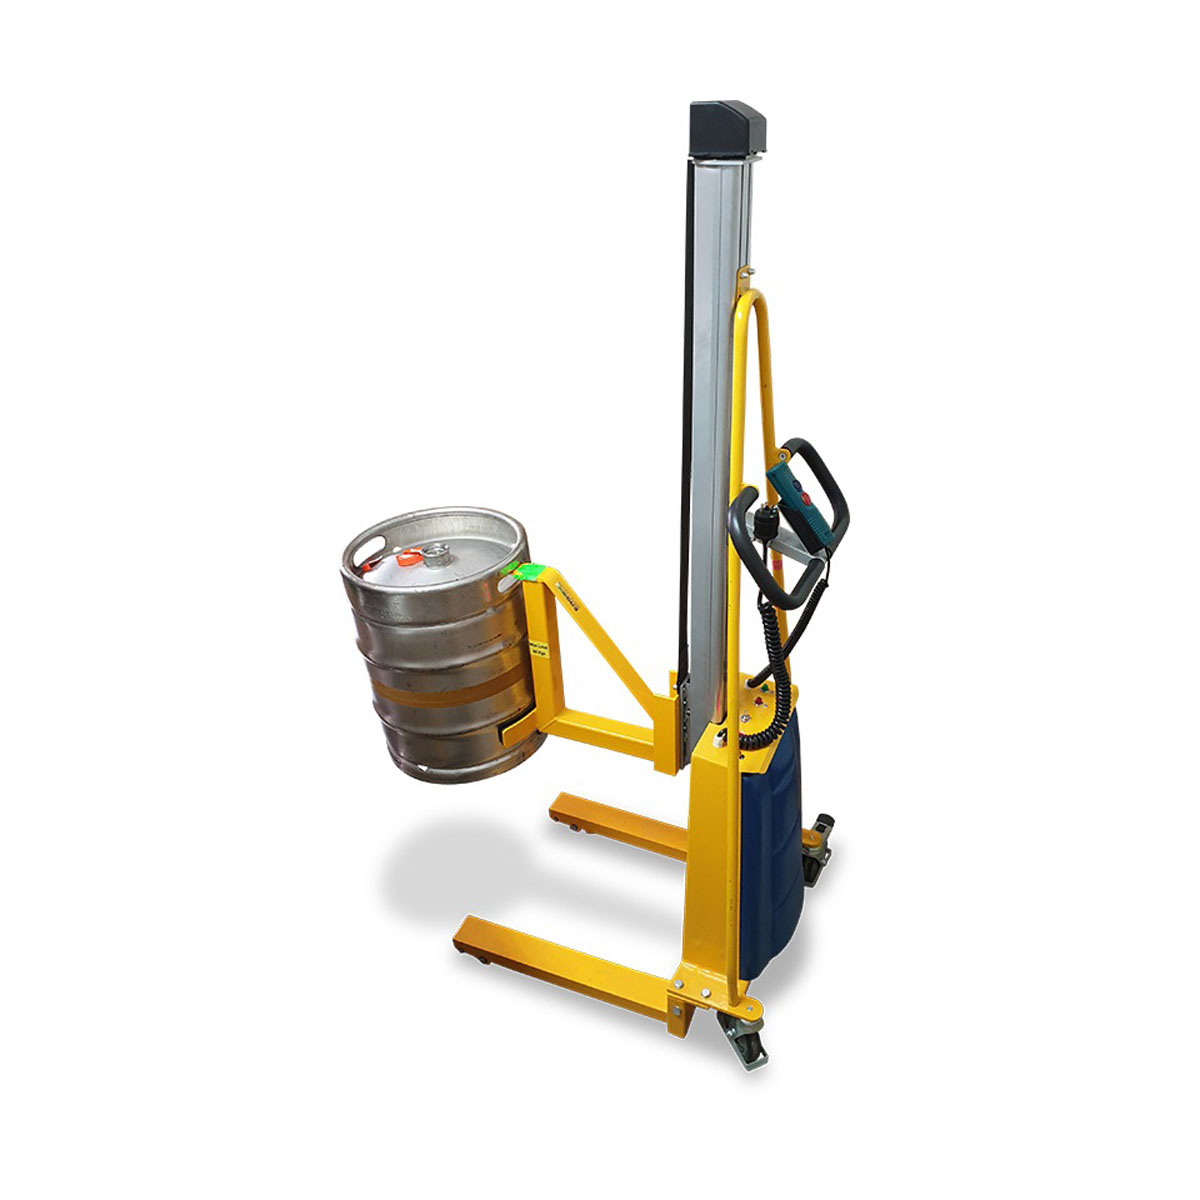 Buy Semi-Electric Keg Lifter in Utility Lifters | Materials Handling Lift Towers from Astrolift NZ